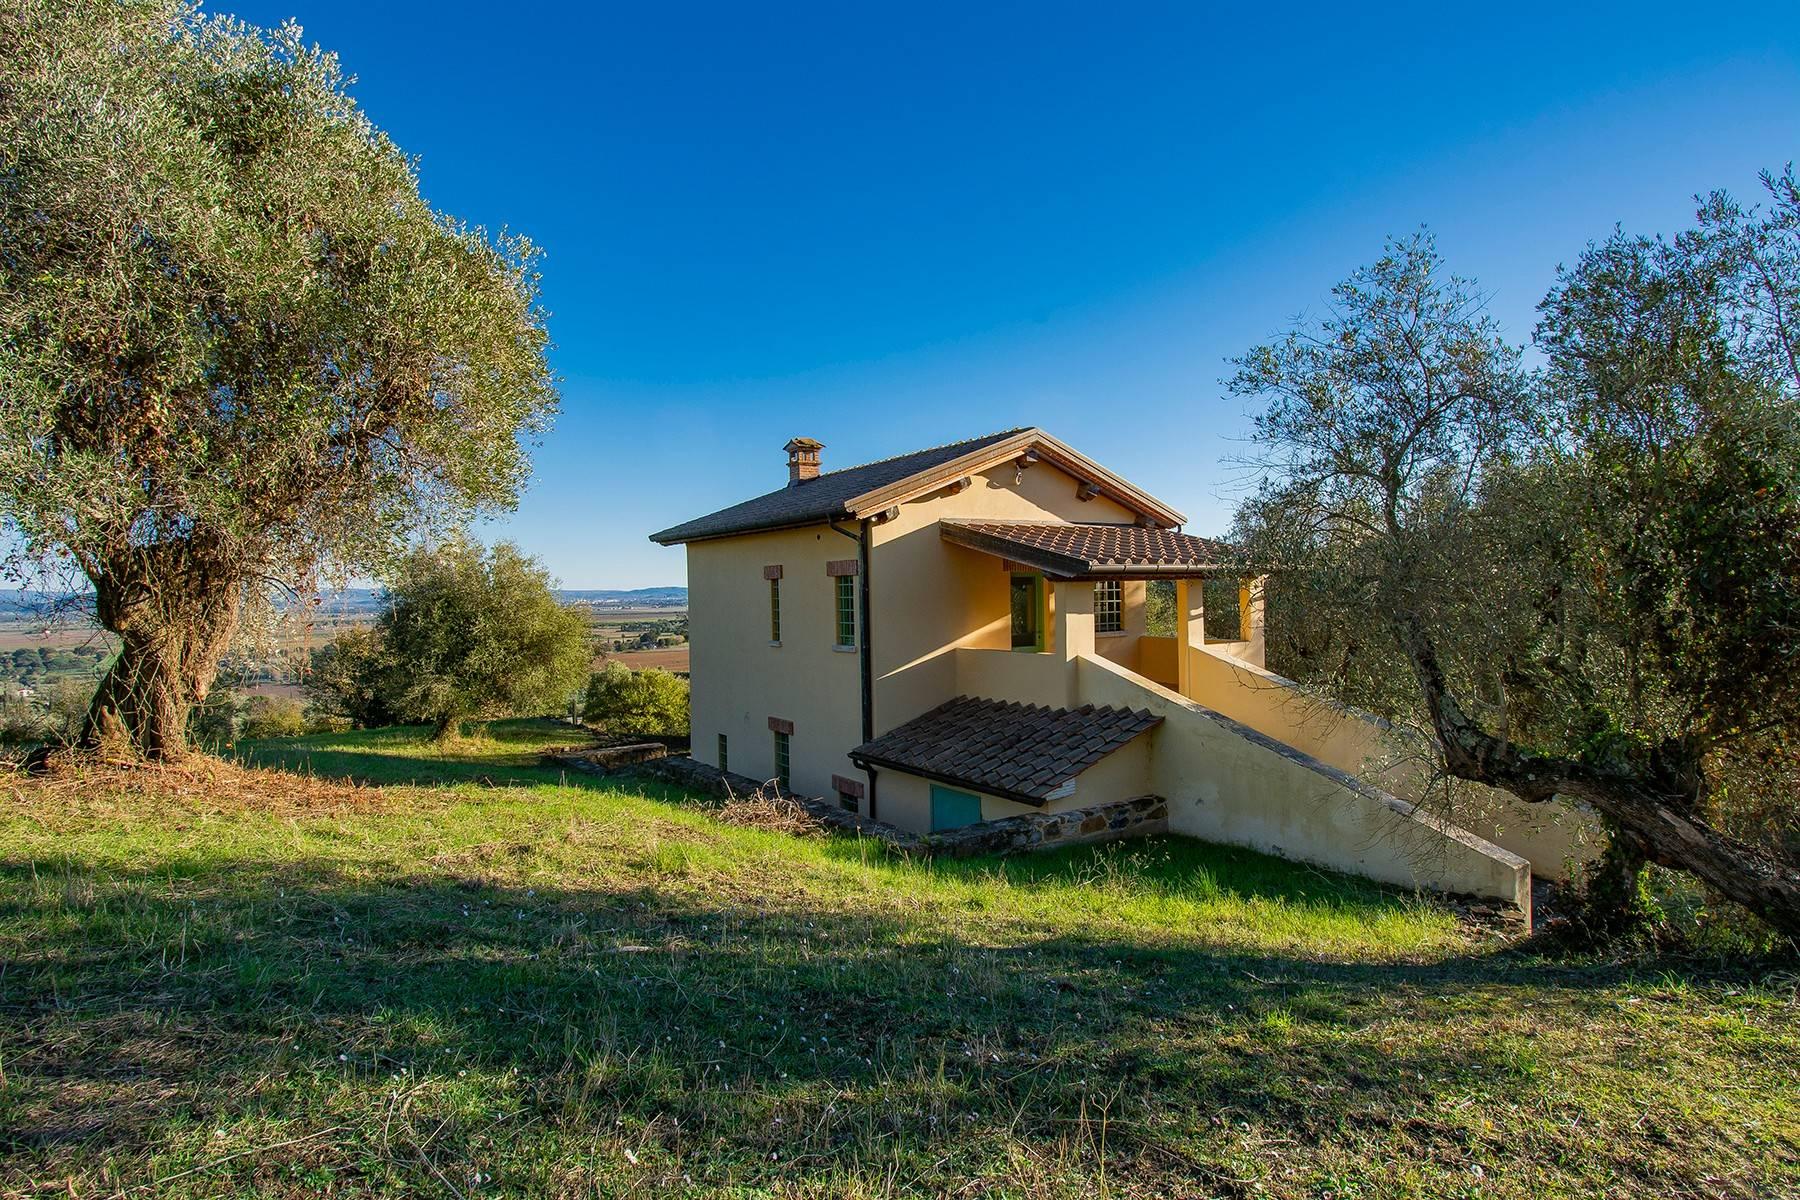 Newly-built farmhouse nestled in the olive groves - 5